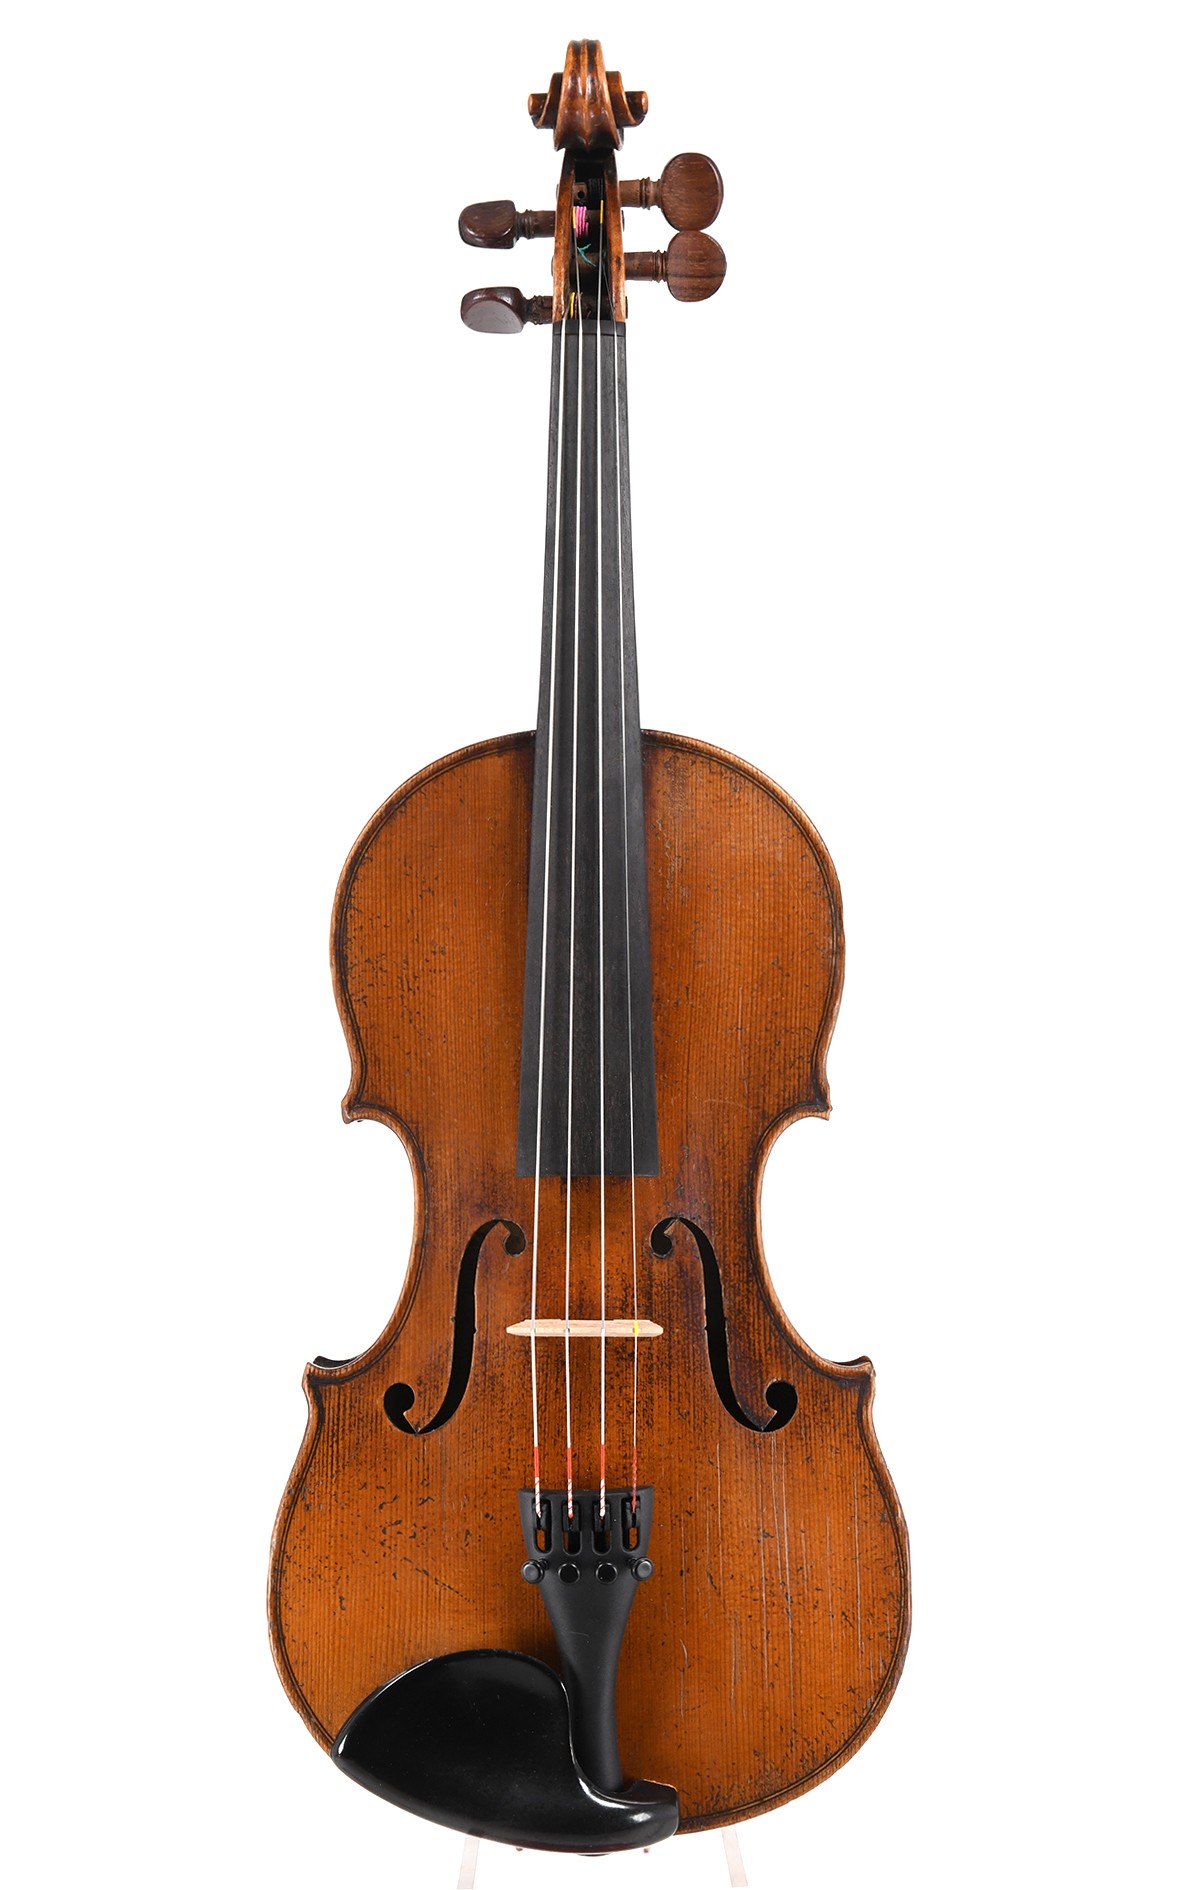 Excellent French 3/4 violin of Mirecourt